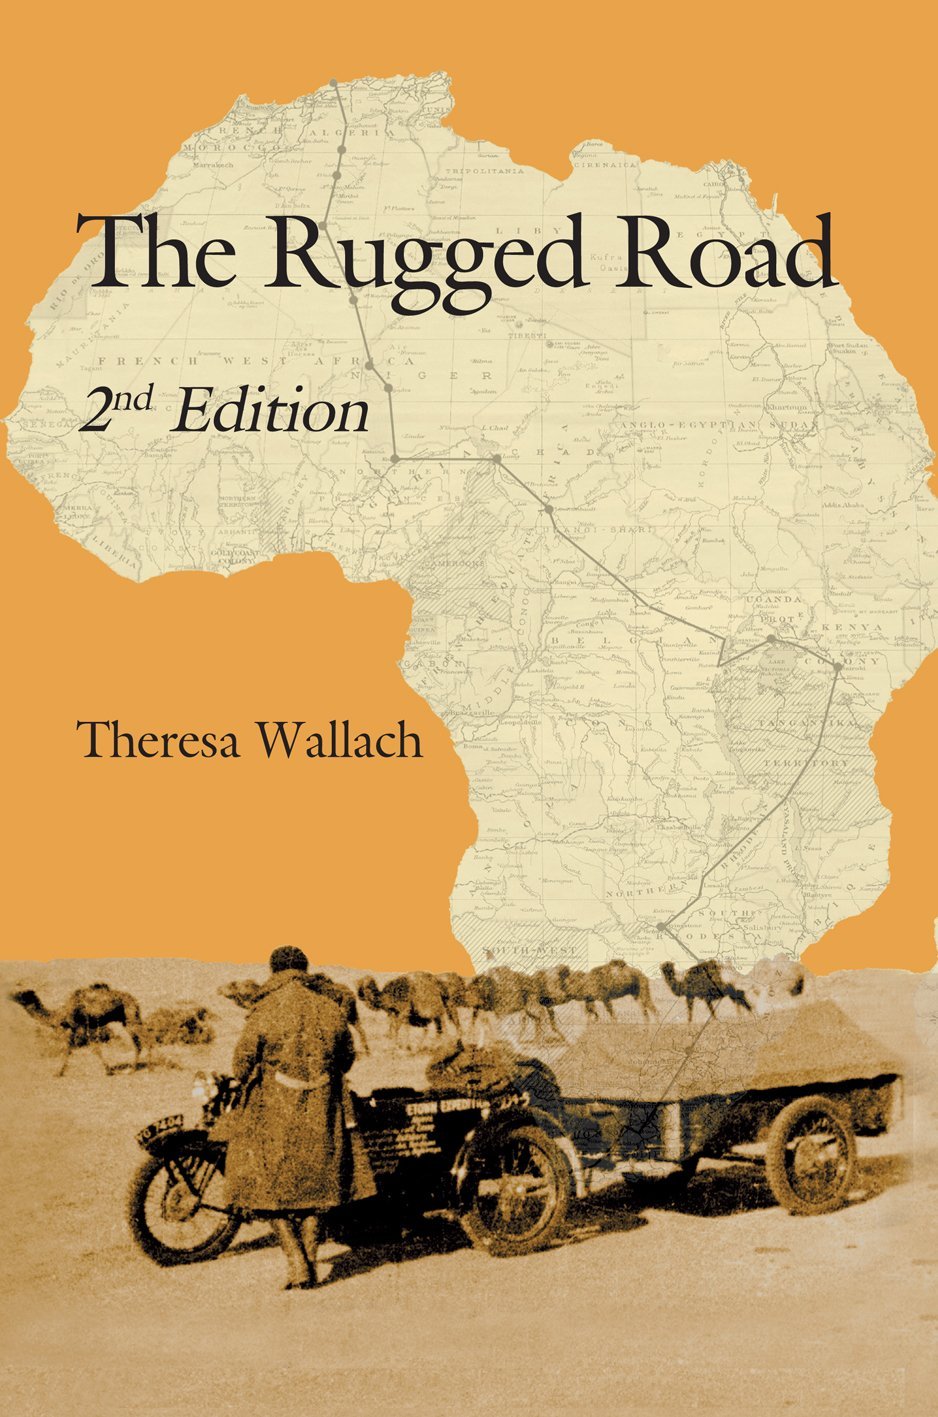 The Rugged Road